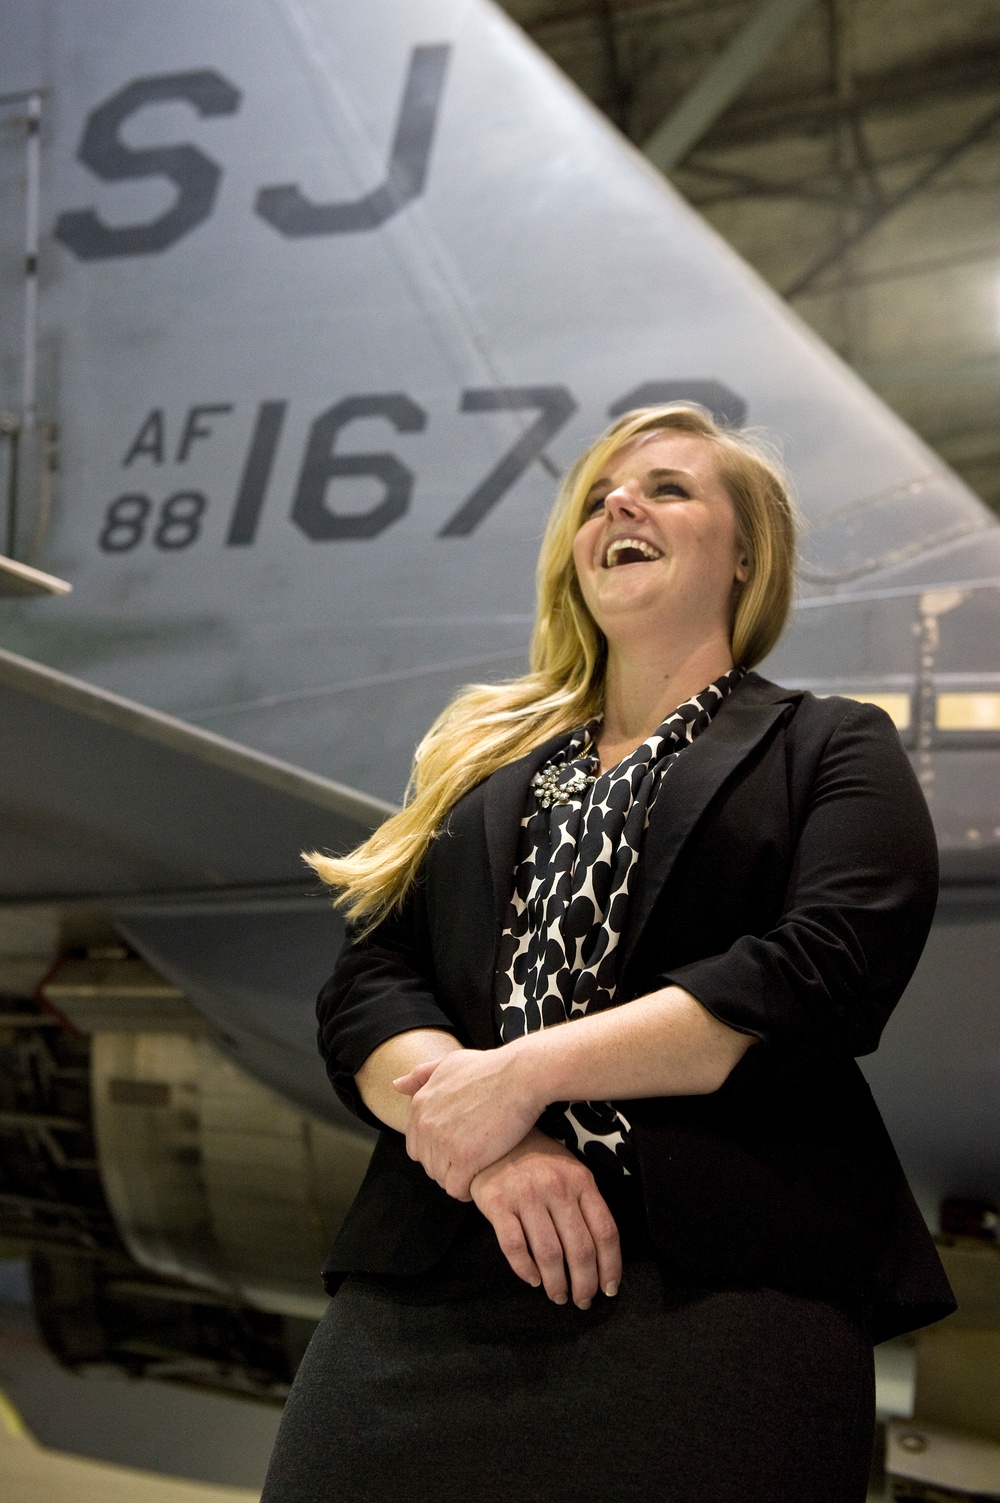 A special great-granddaughter learns about Seymour Johnson: the man and the base